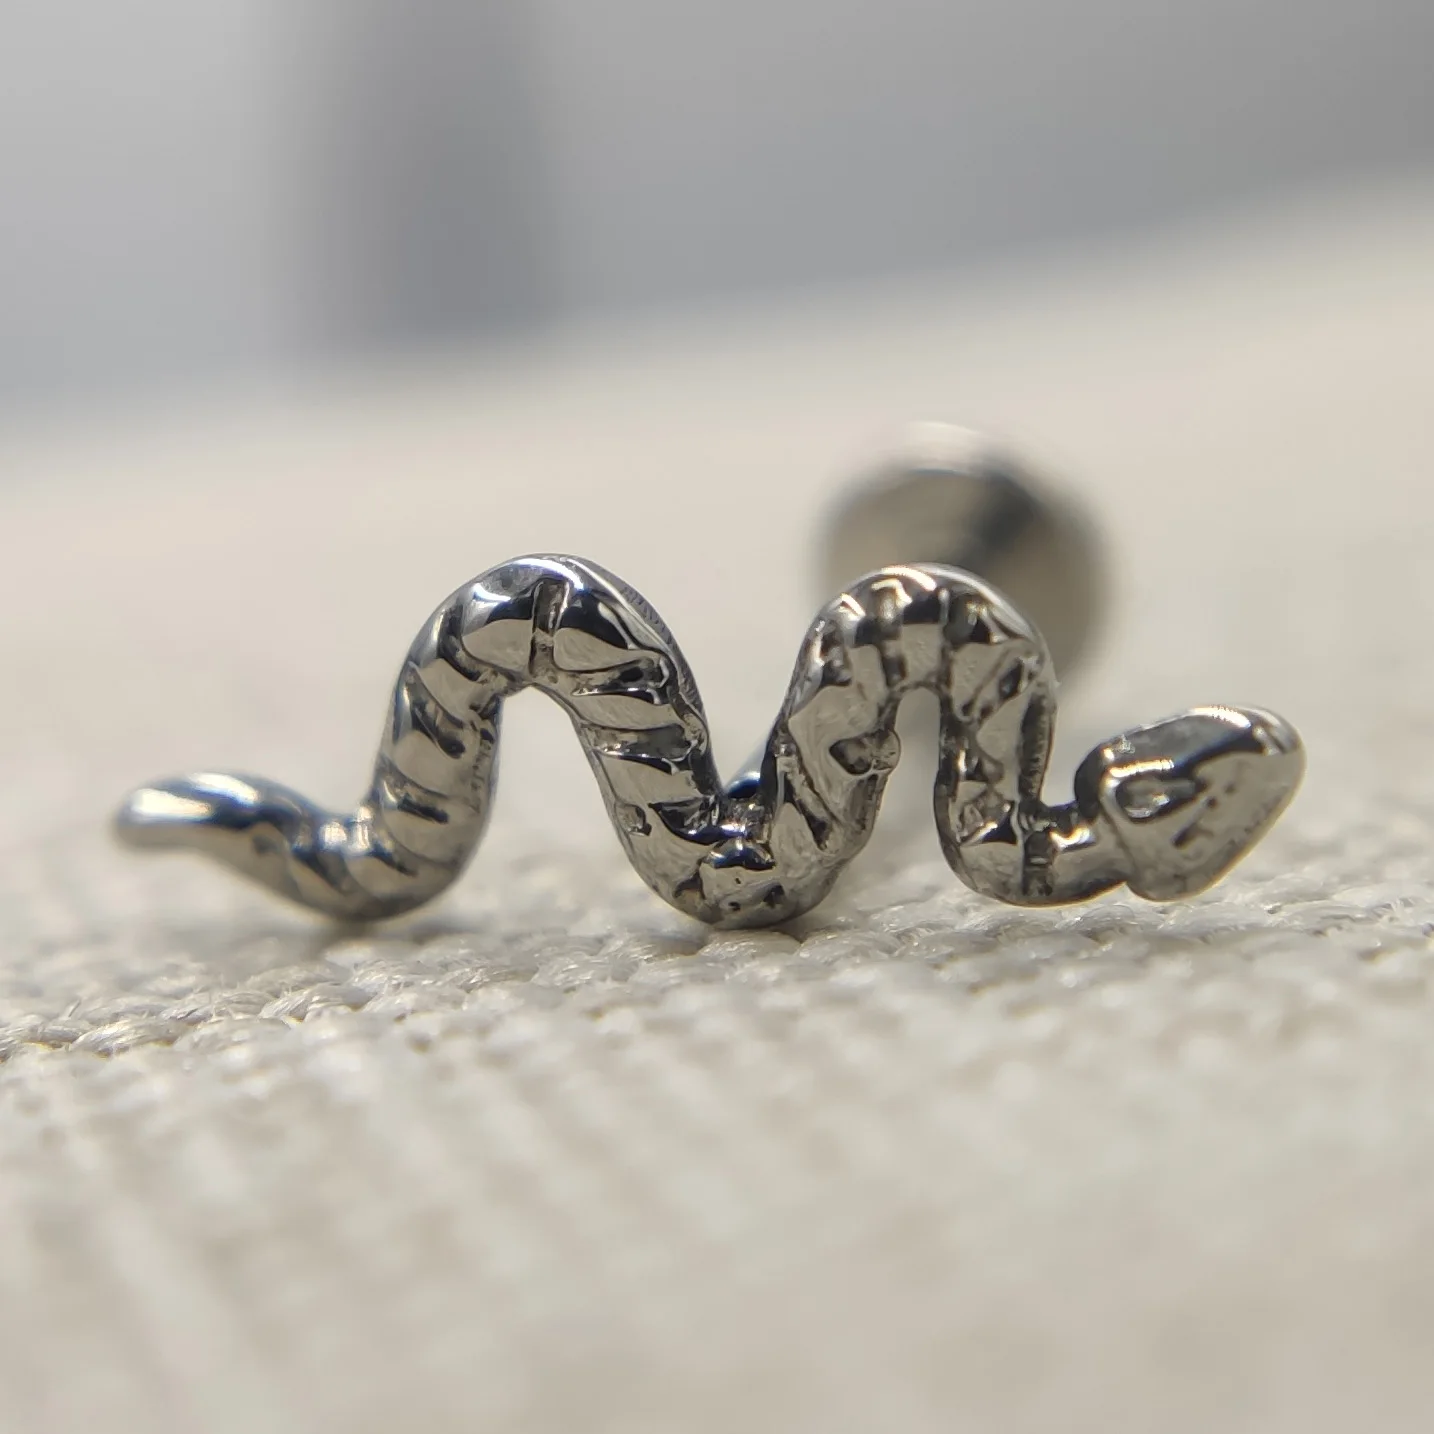 

16G ASTM F136 Titanium Snake Labret Top Stud for Lip Tongue Cheek Helix Cartilage Conch Piercing Body Jewelry